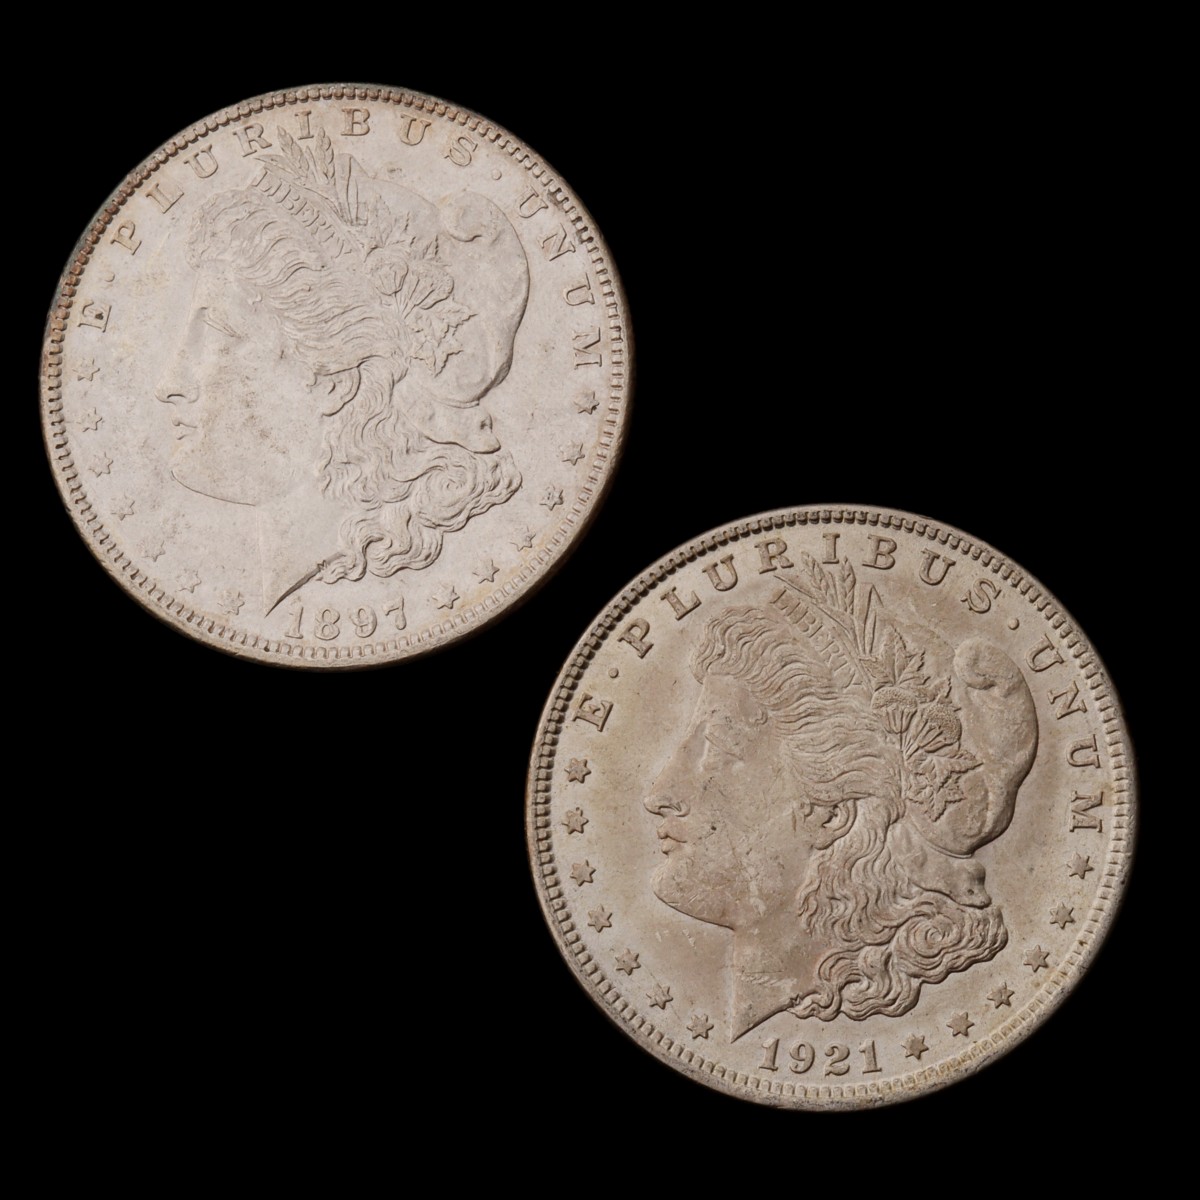 TWO HIGHER GRADE MORGAN SILVER DOLLARS, 1897 AND 1921